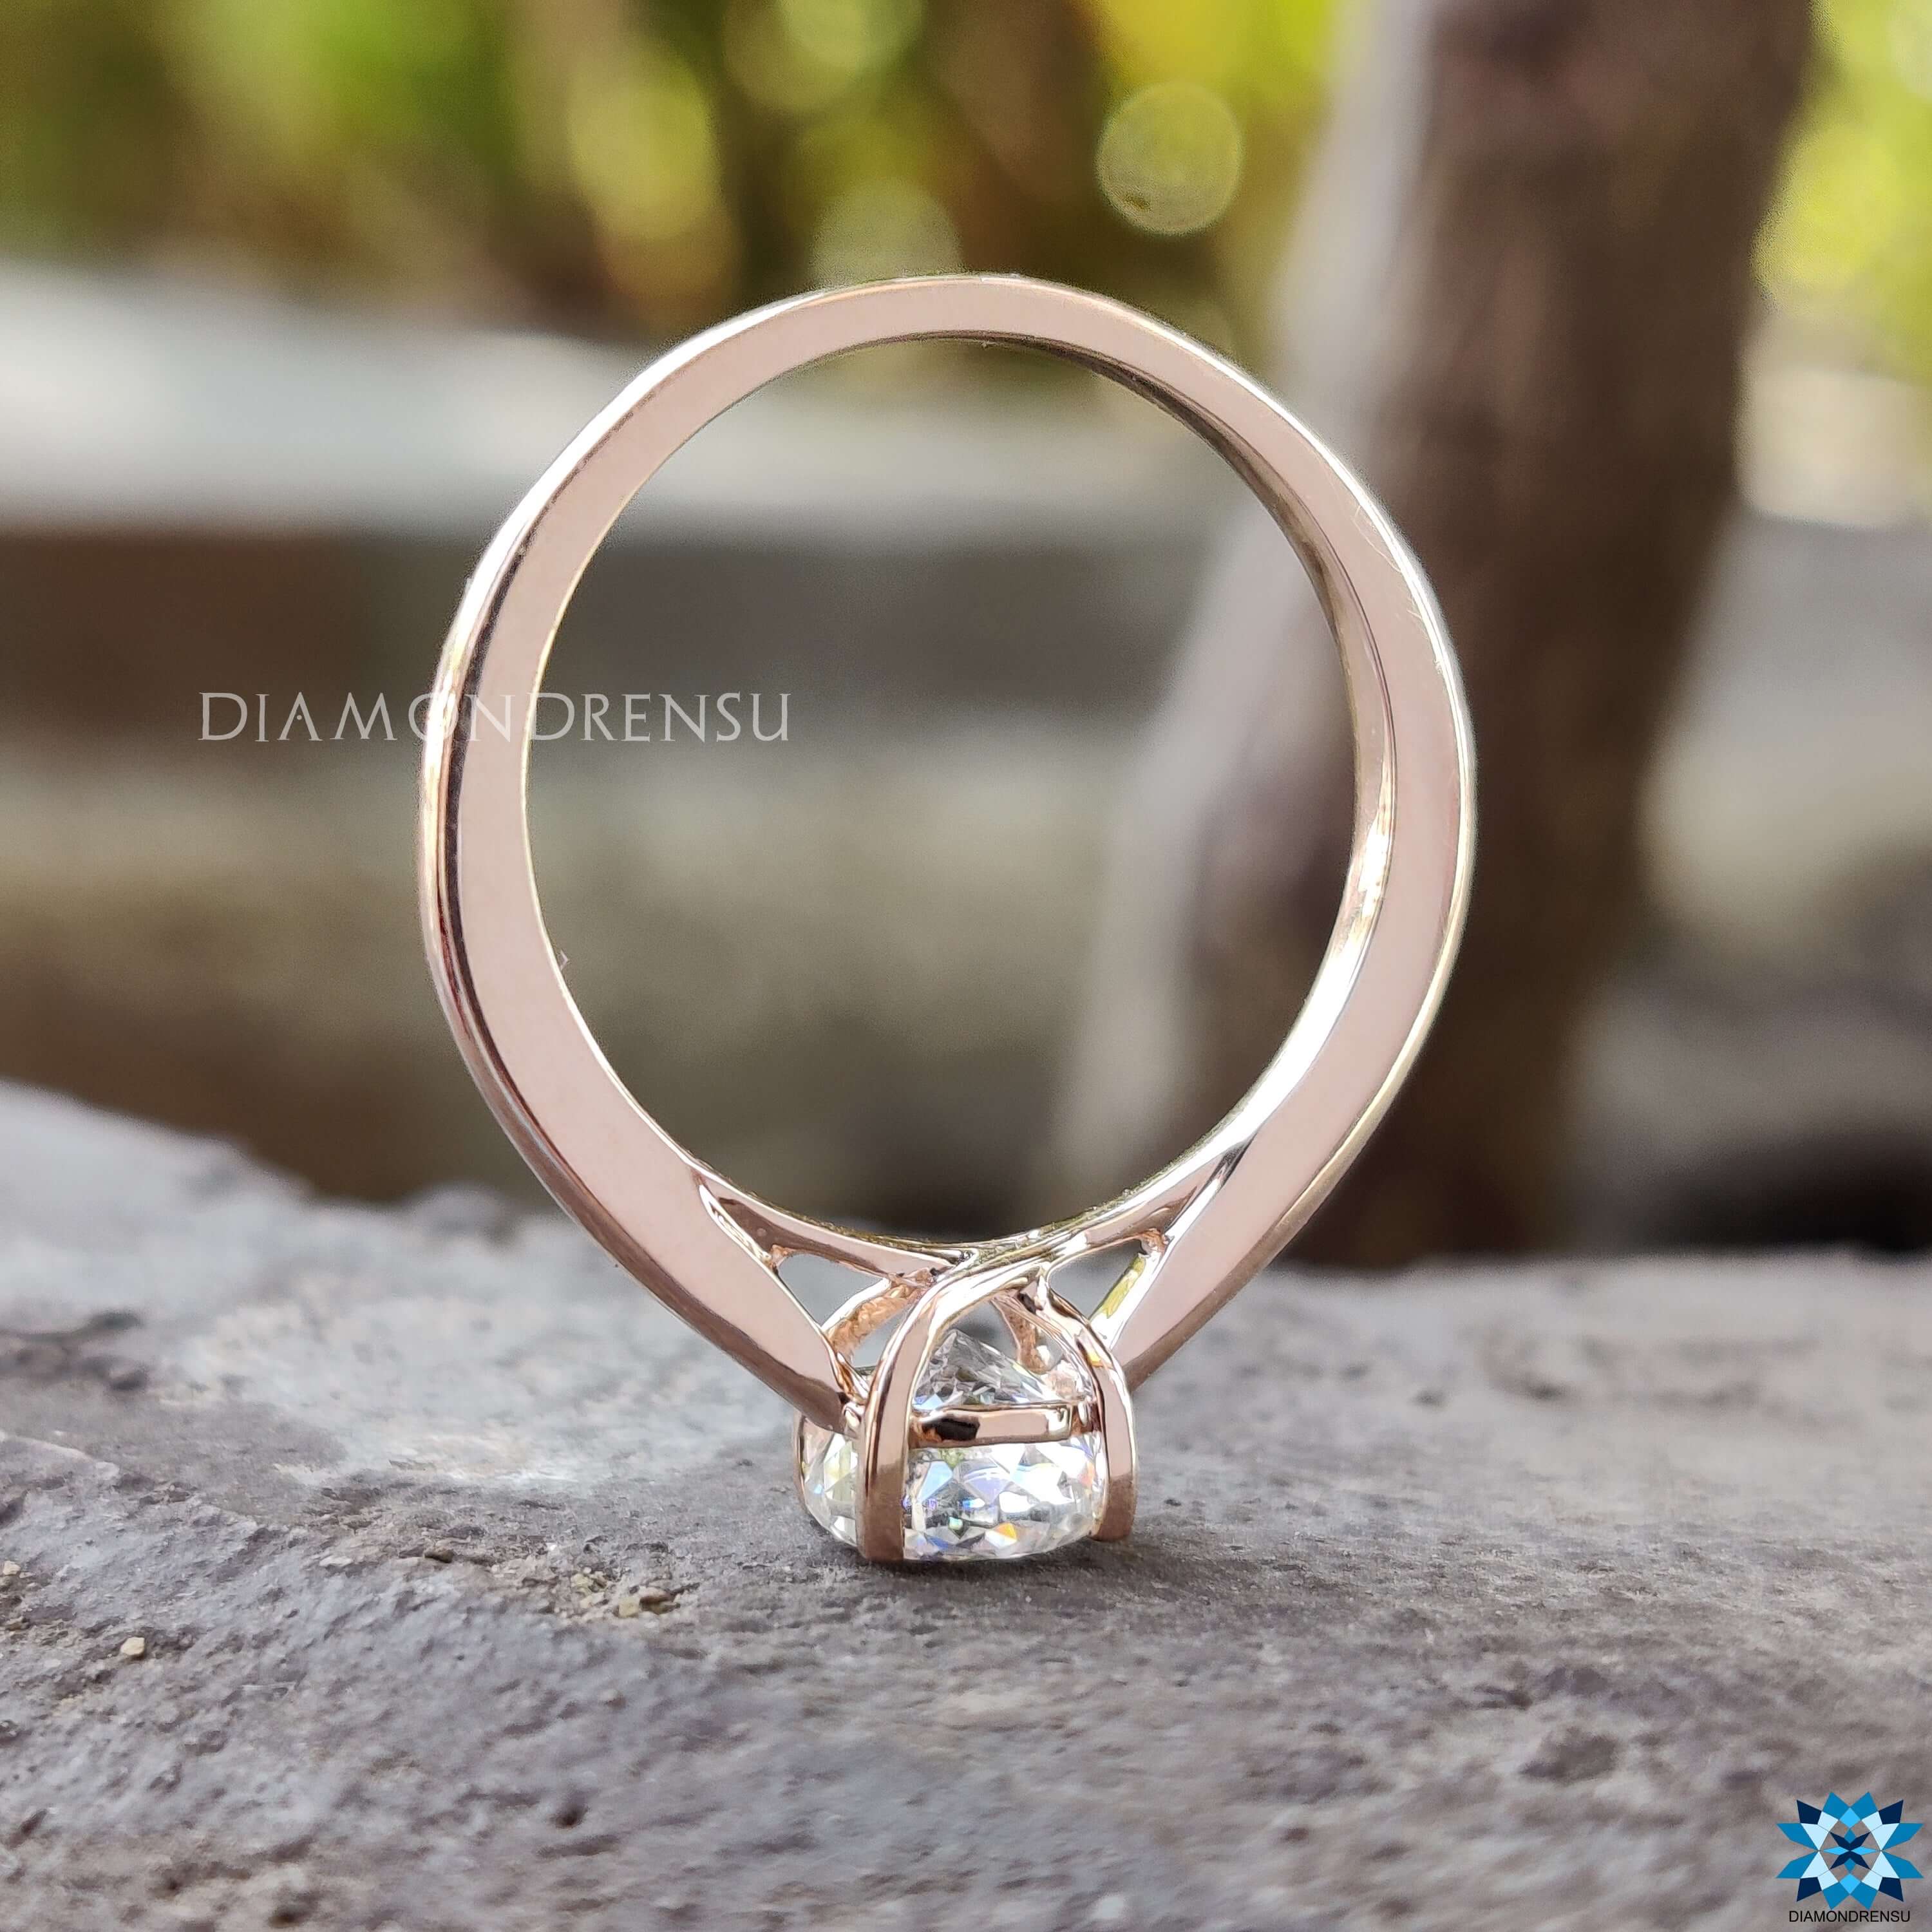 Diamond Solitaire Engagement Ring with Infinity Detail Bridge